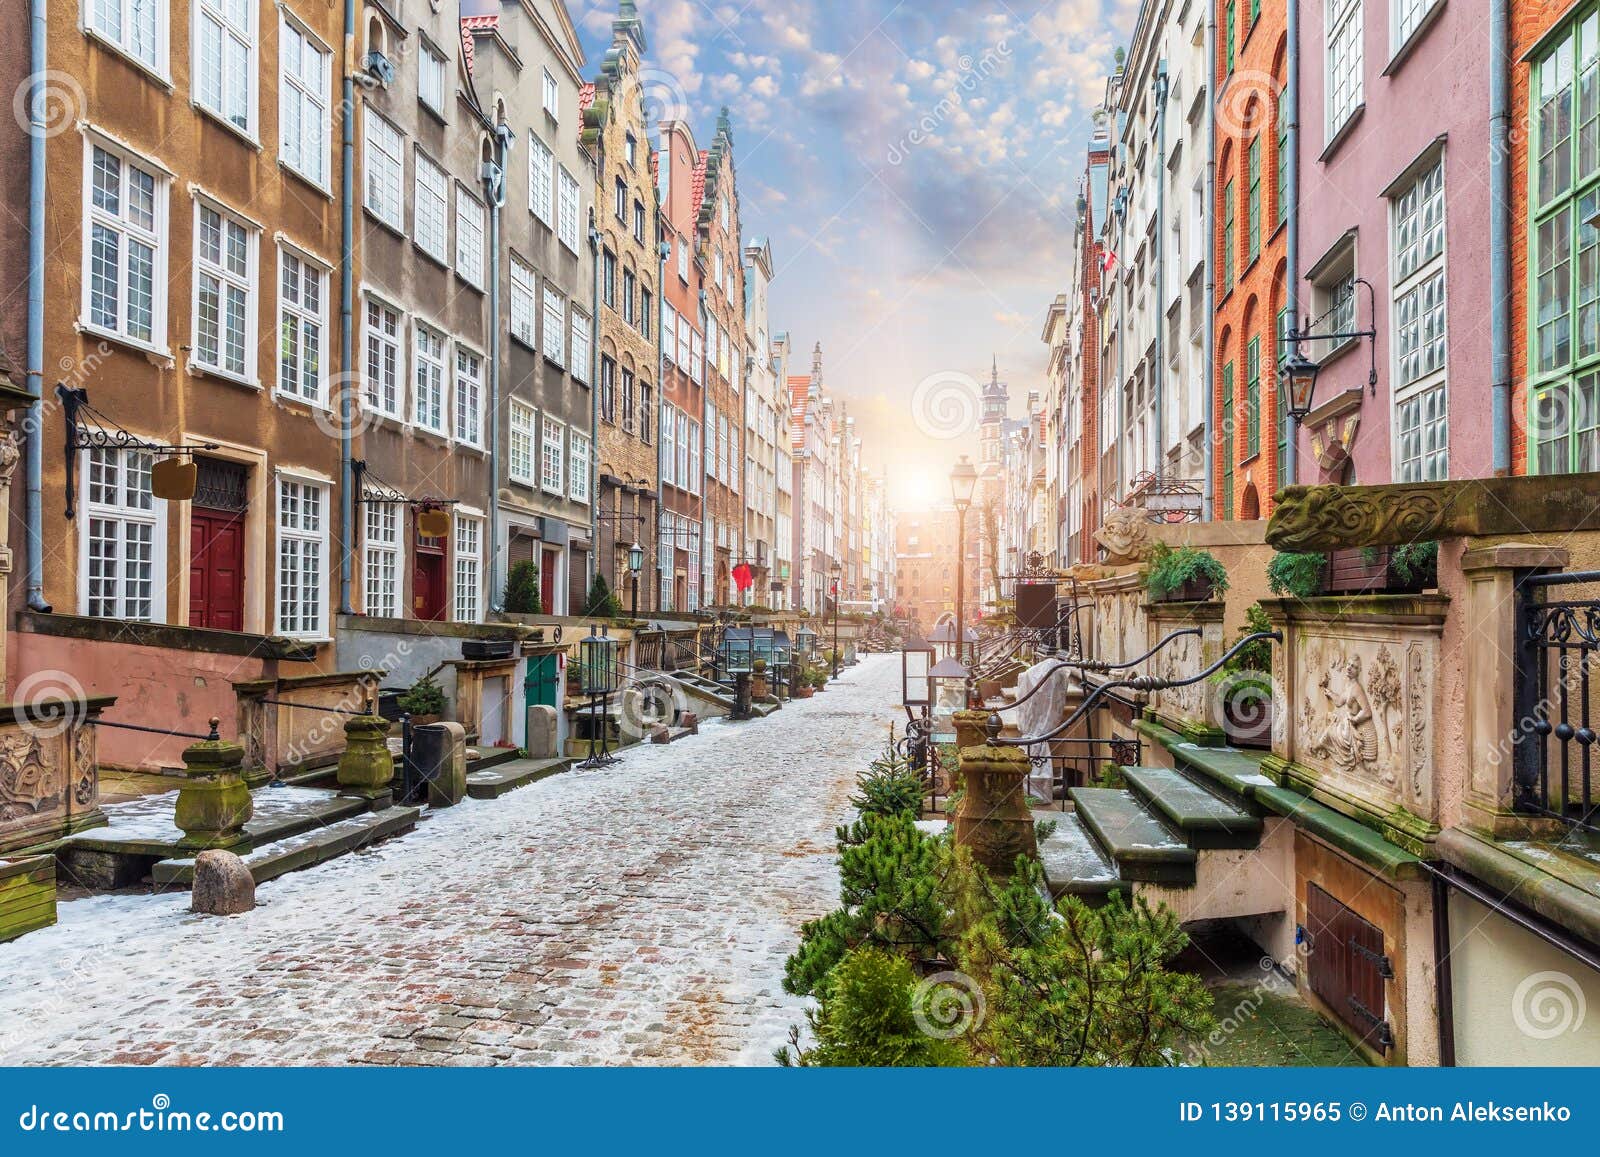 mariacka street, a famous street in gdansk, poland, sunrise view